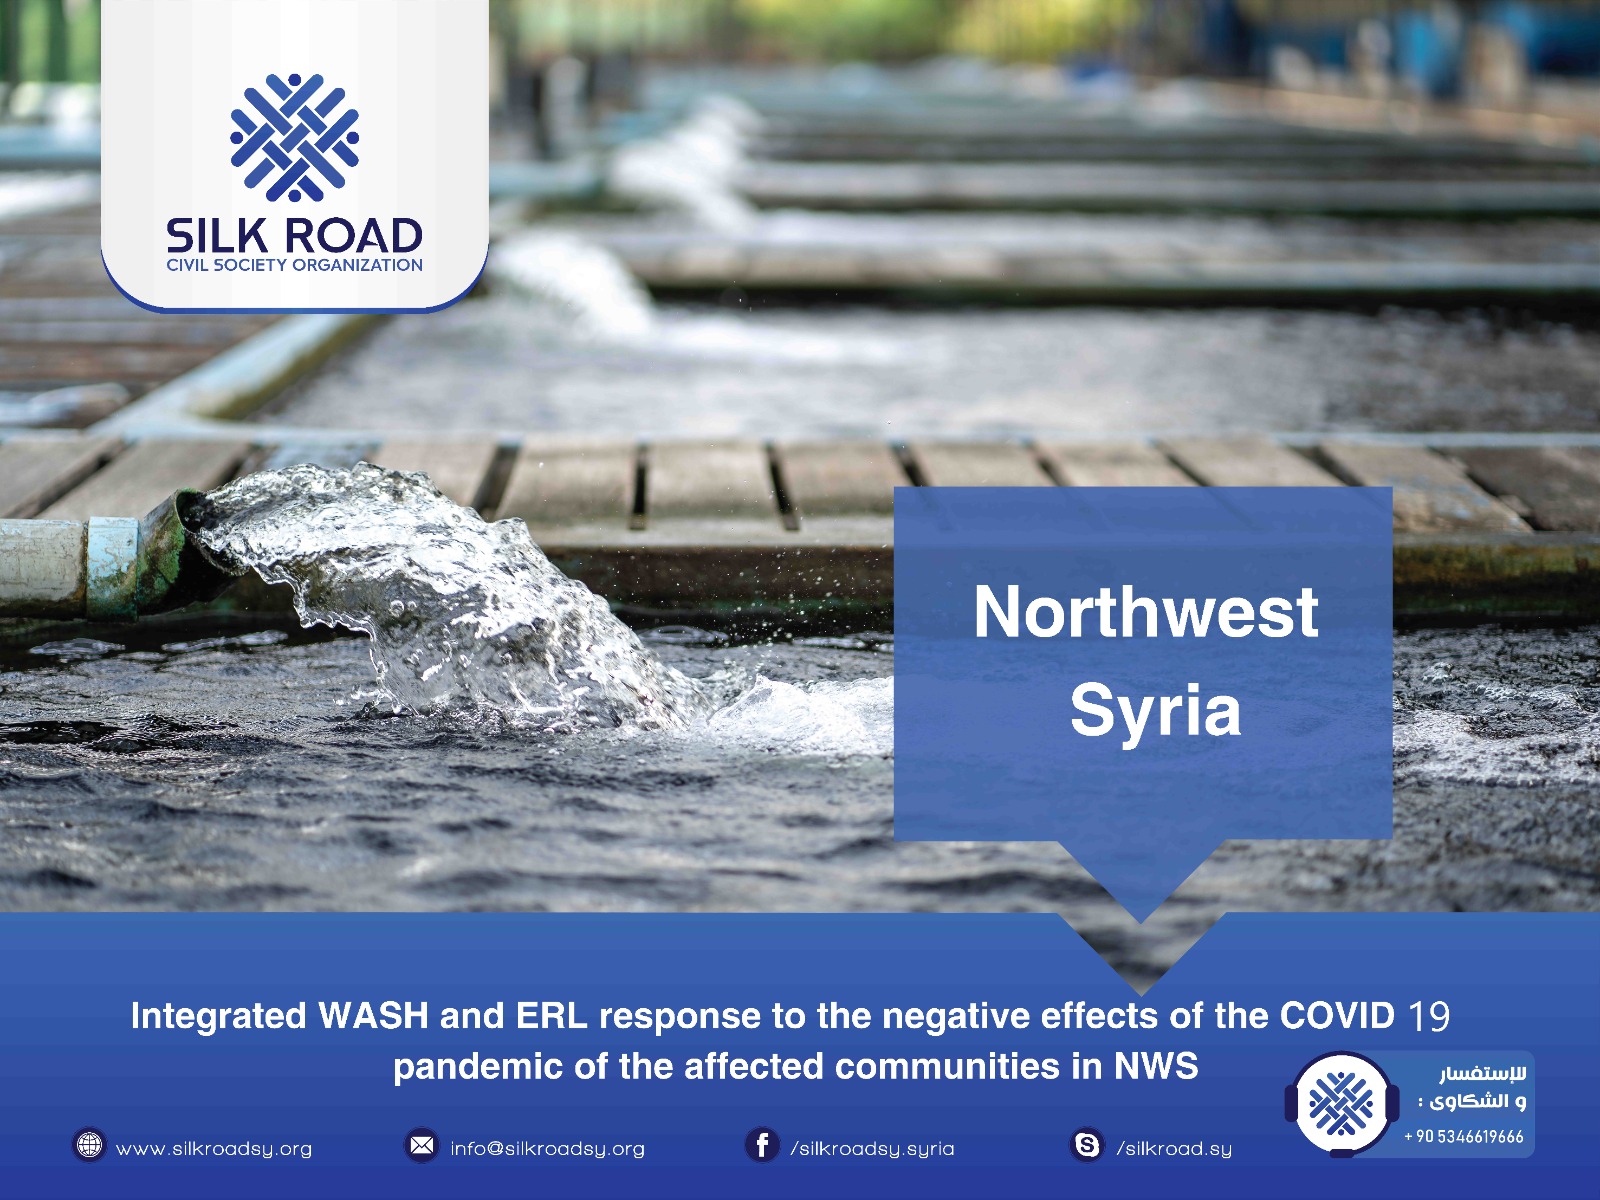 Integrated WASH and ERL response to the negative effects of the COVID 19 pandemic of the affected communities in NWS